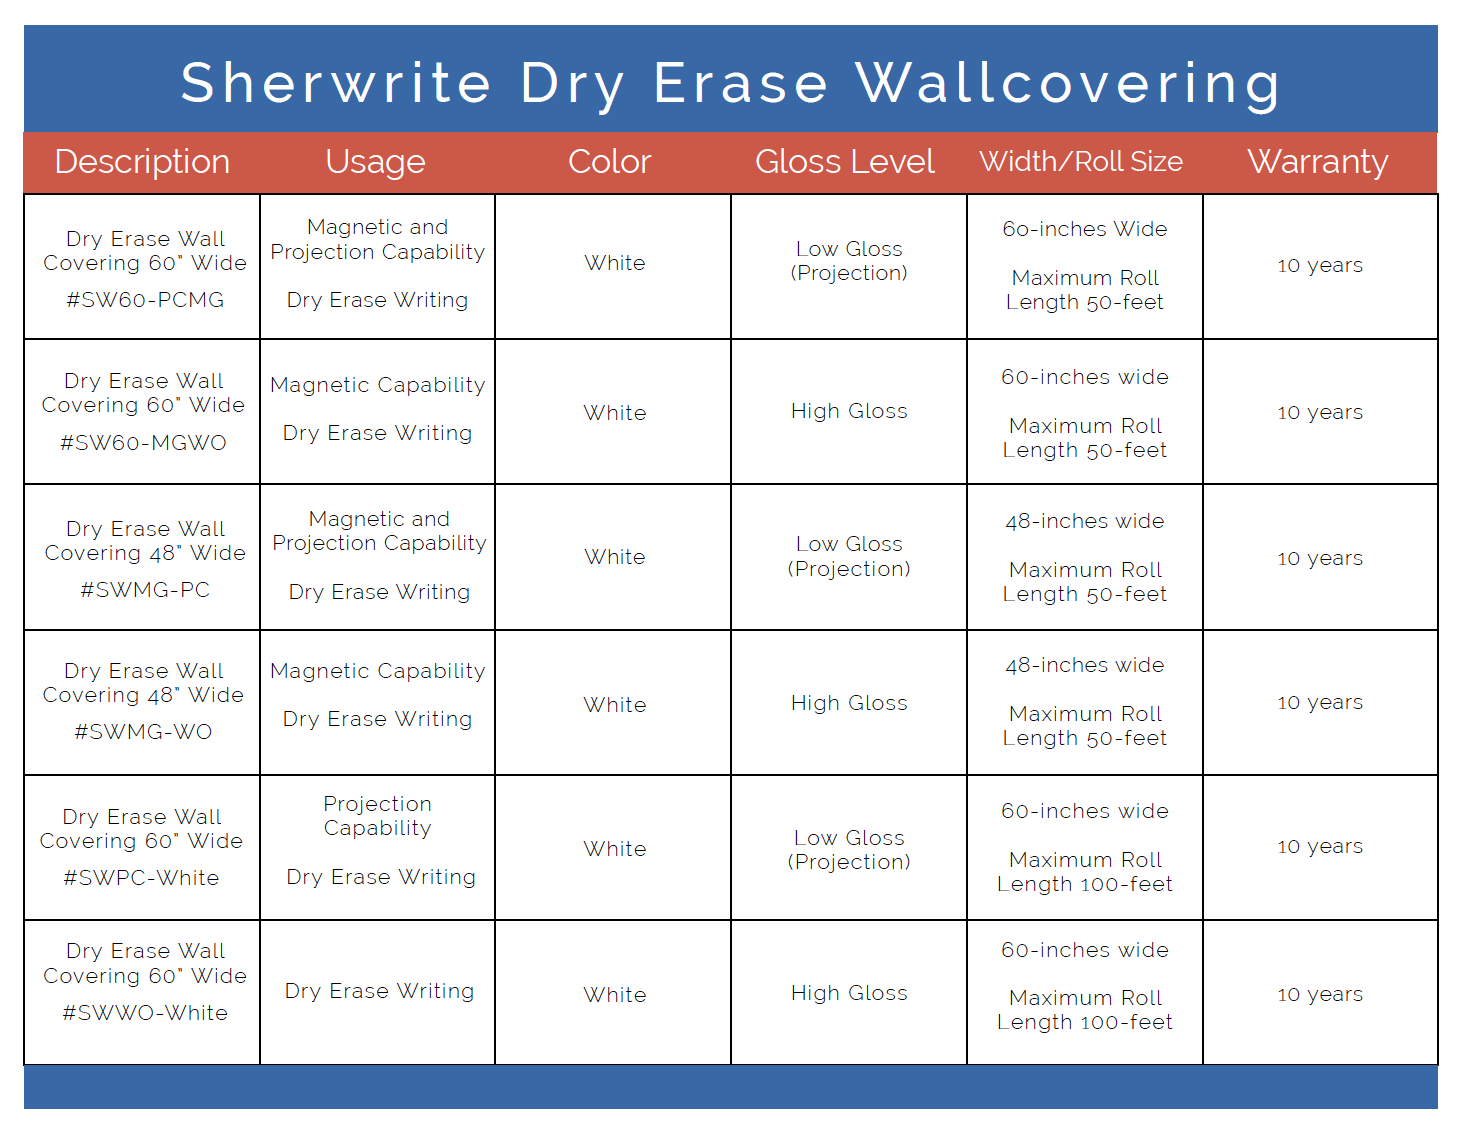 Dry Erase wallcovering for flat or curved surfaces. Wall coverings